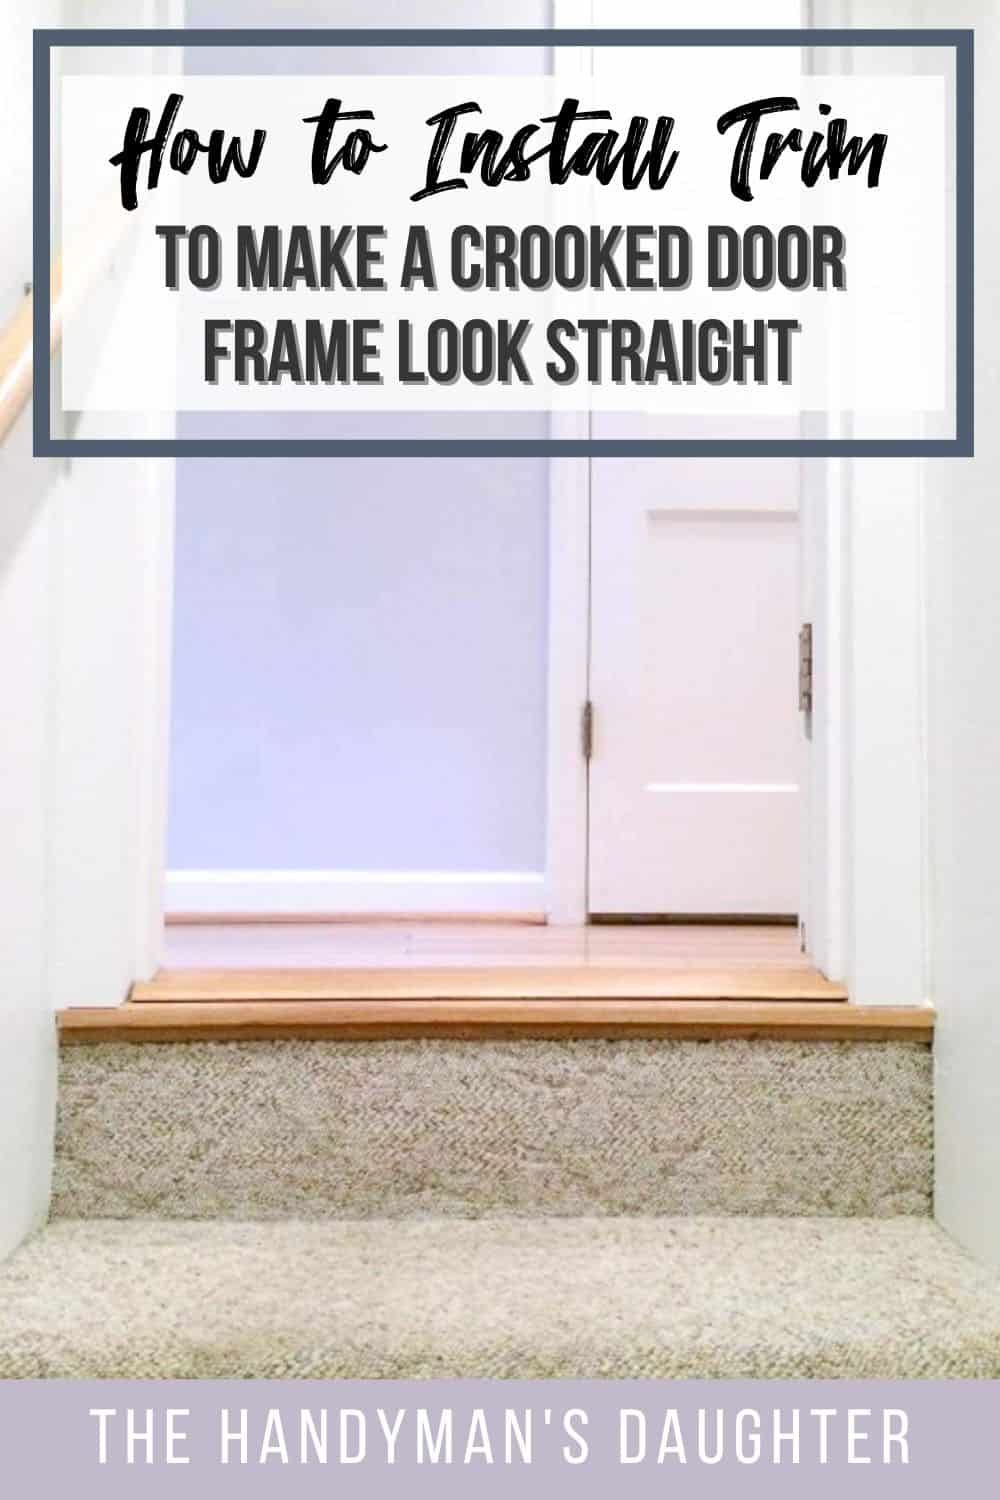 image of door frame with steps 